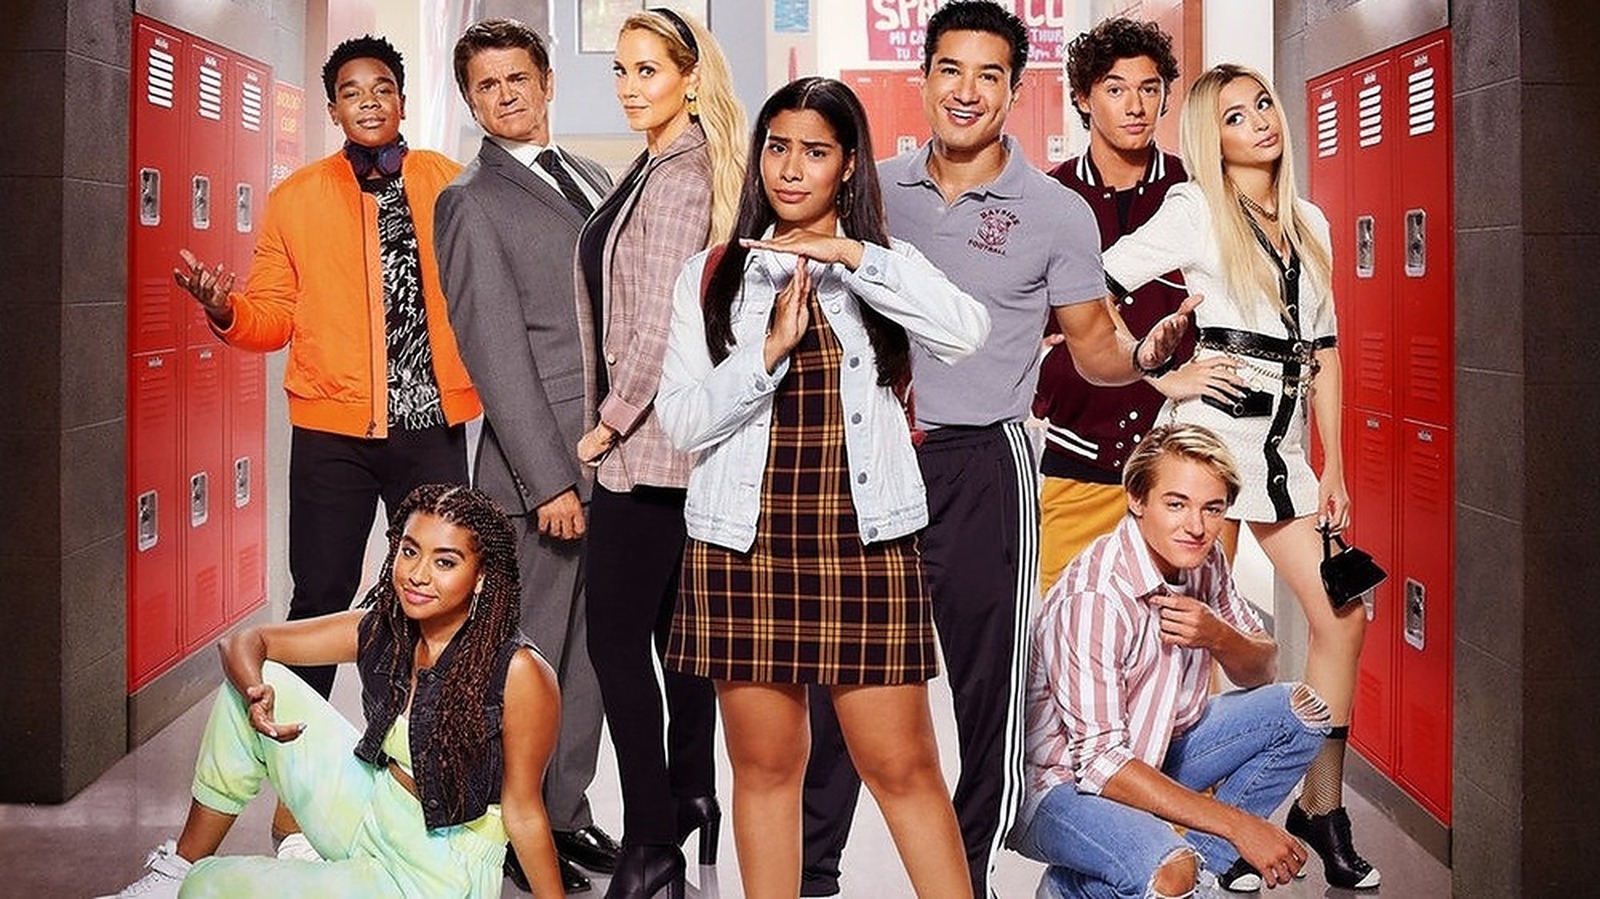 Saved By The Bell Season 2 Release Date, Cast, And Plot - What We Know So  Far